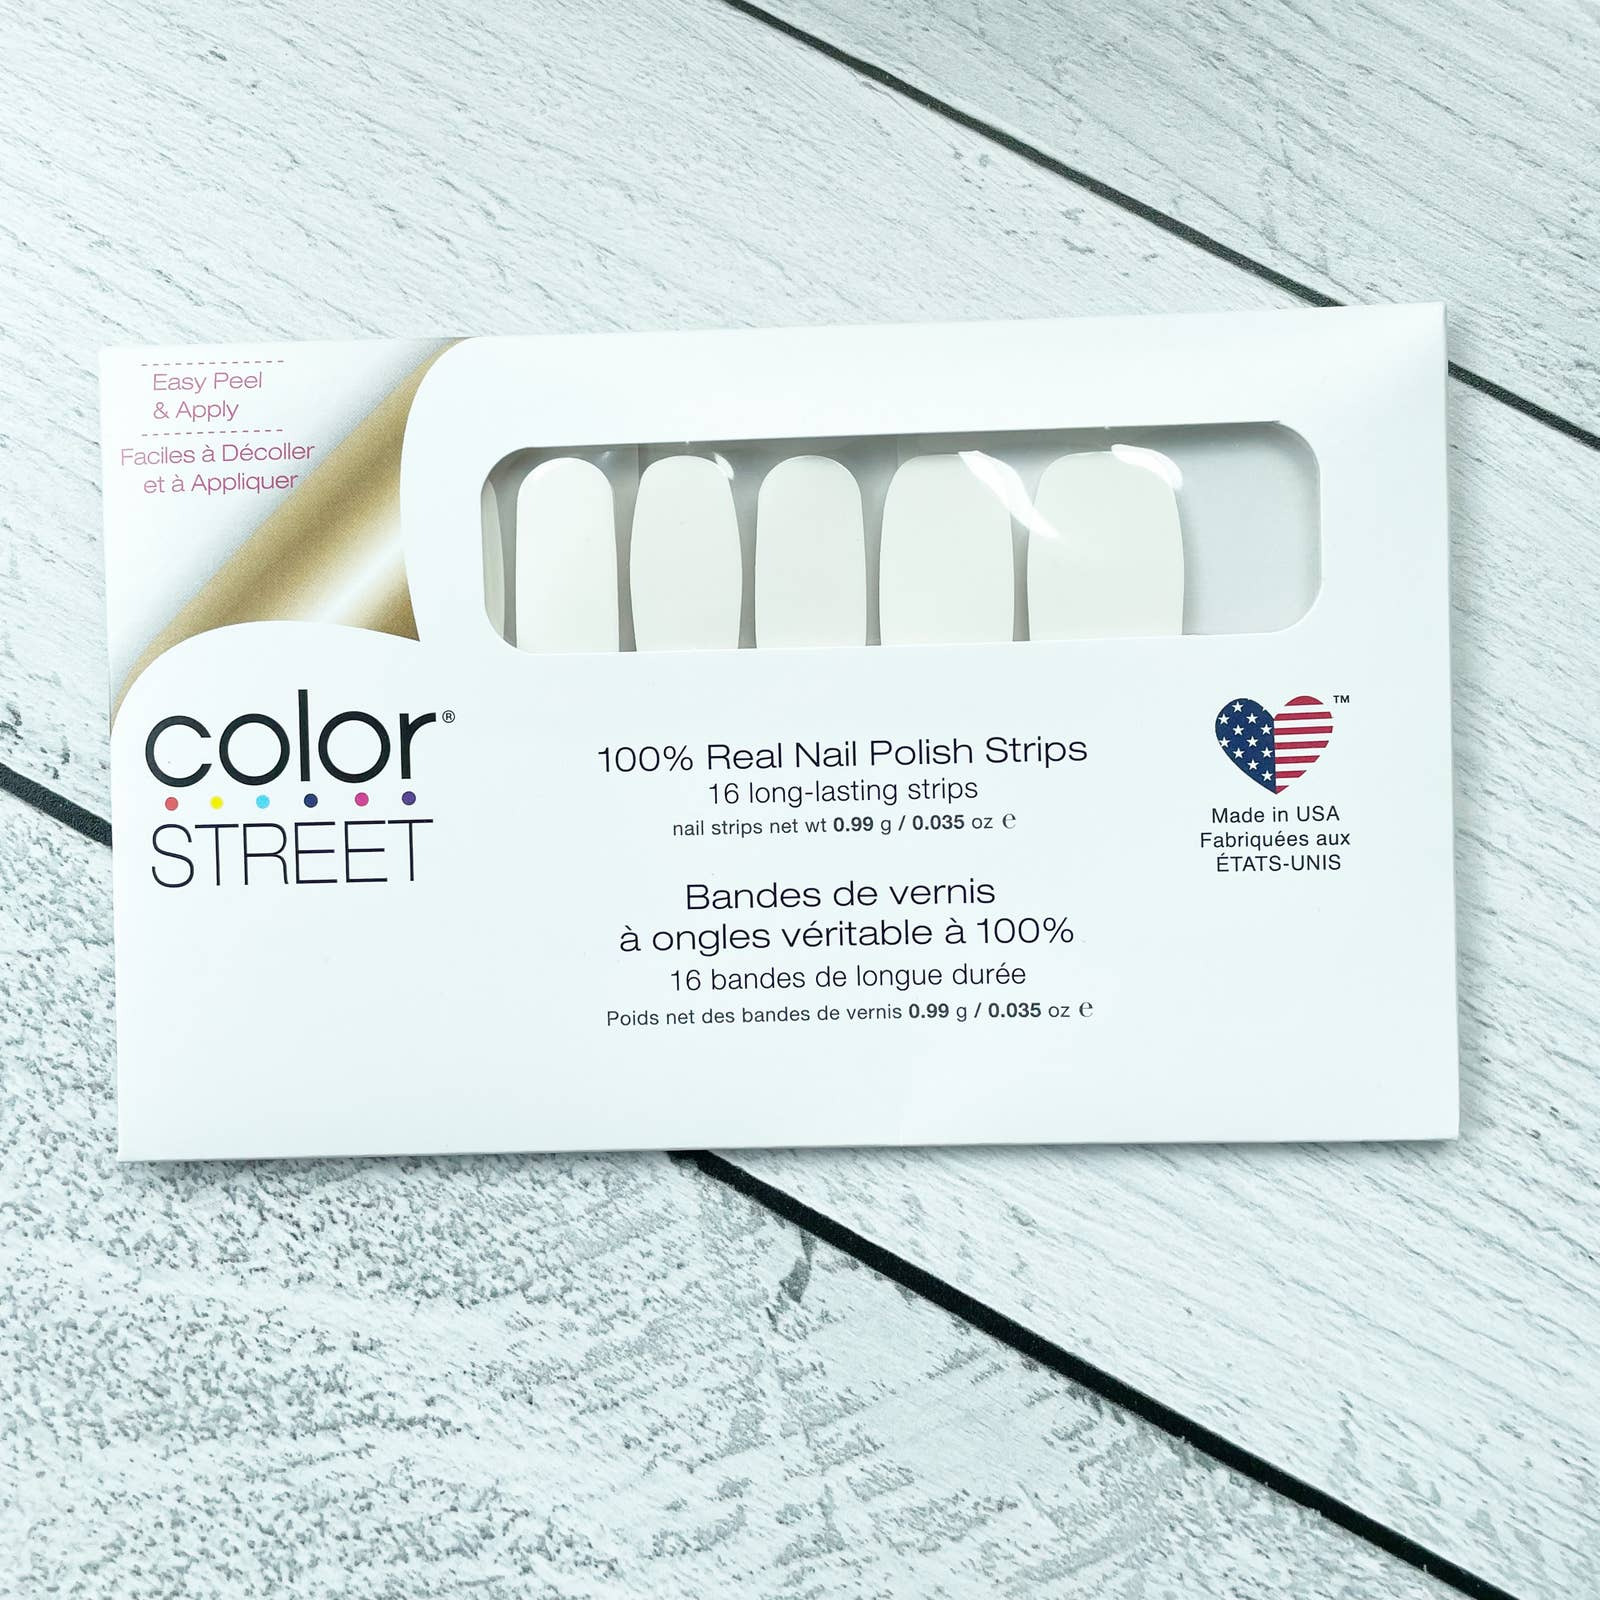 Color Street Real Nail Polish Strips Easy Peel & Apply Creme White Swiss & Tell